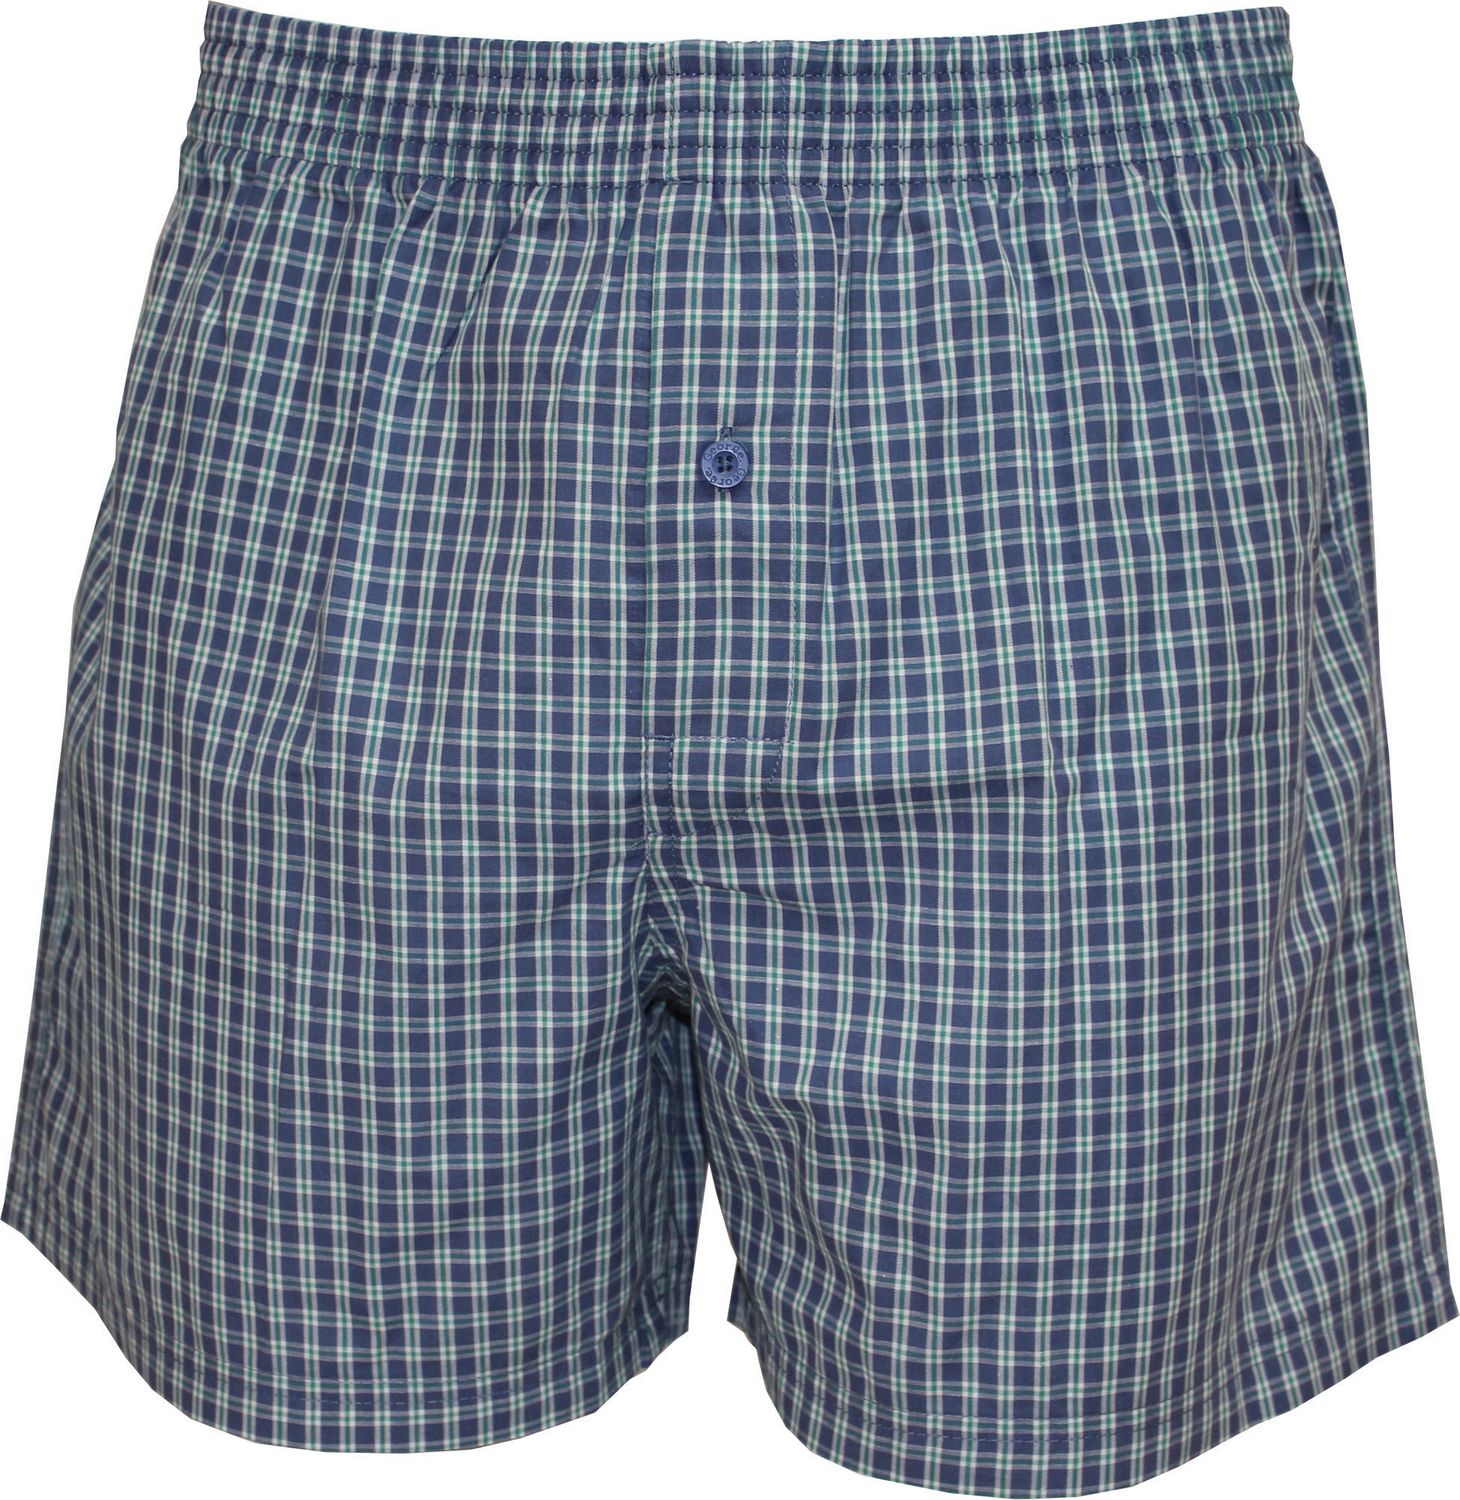 George Men's Woven Boxers Shorts, Pack of 2 | Walmart Canada